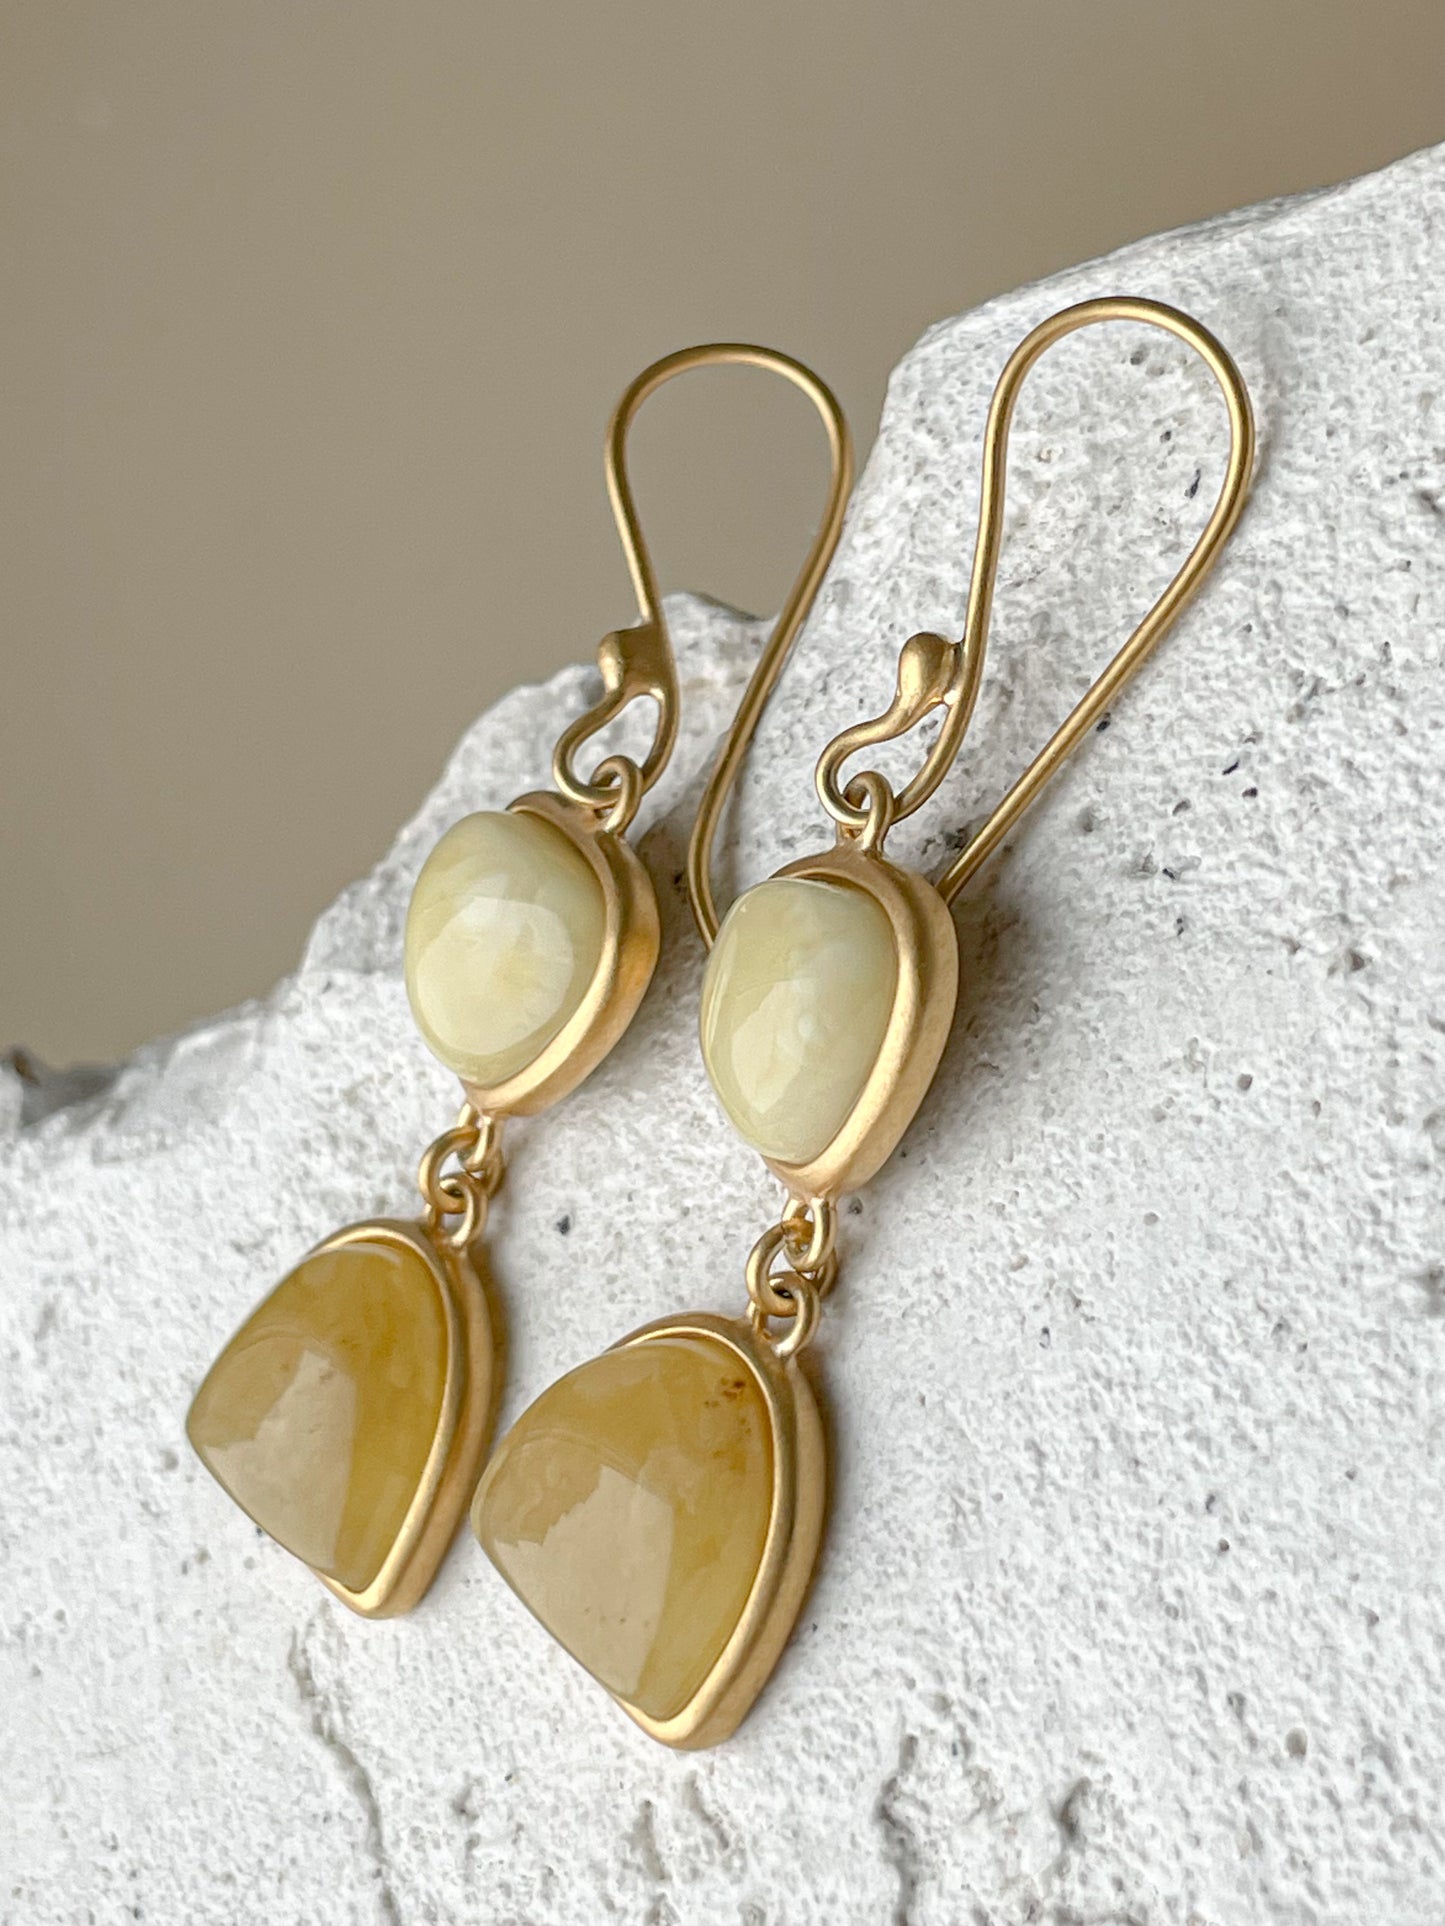 Amber dangle earrings - Gold plated silver - Multicolor earrings collection